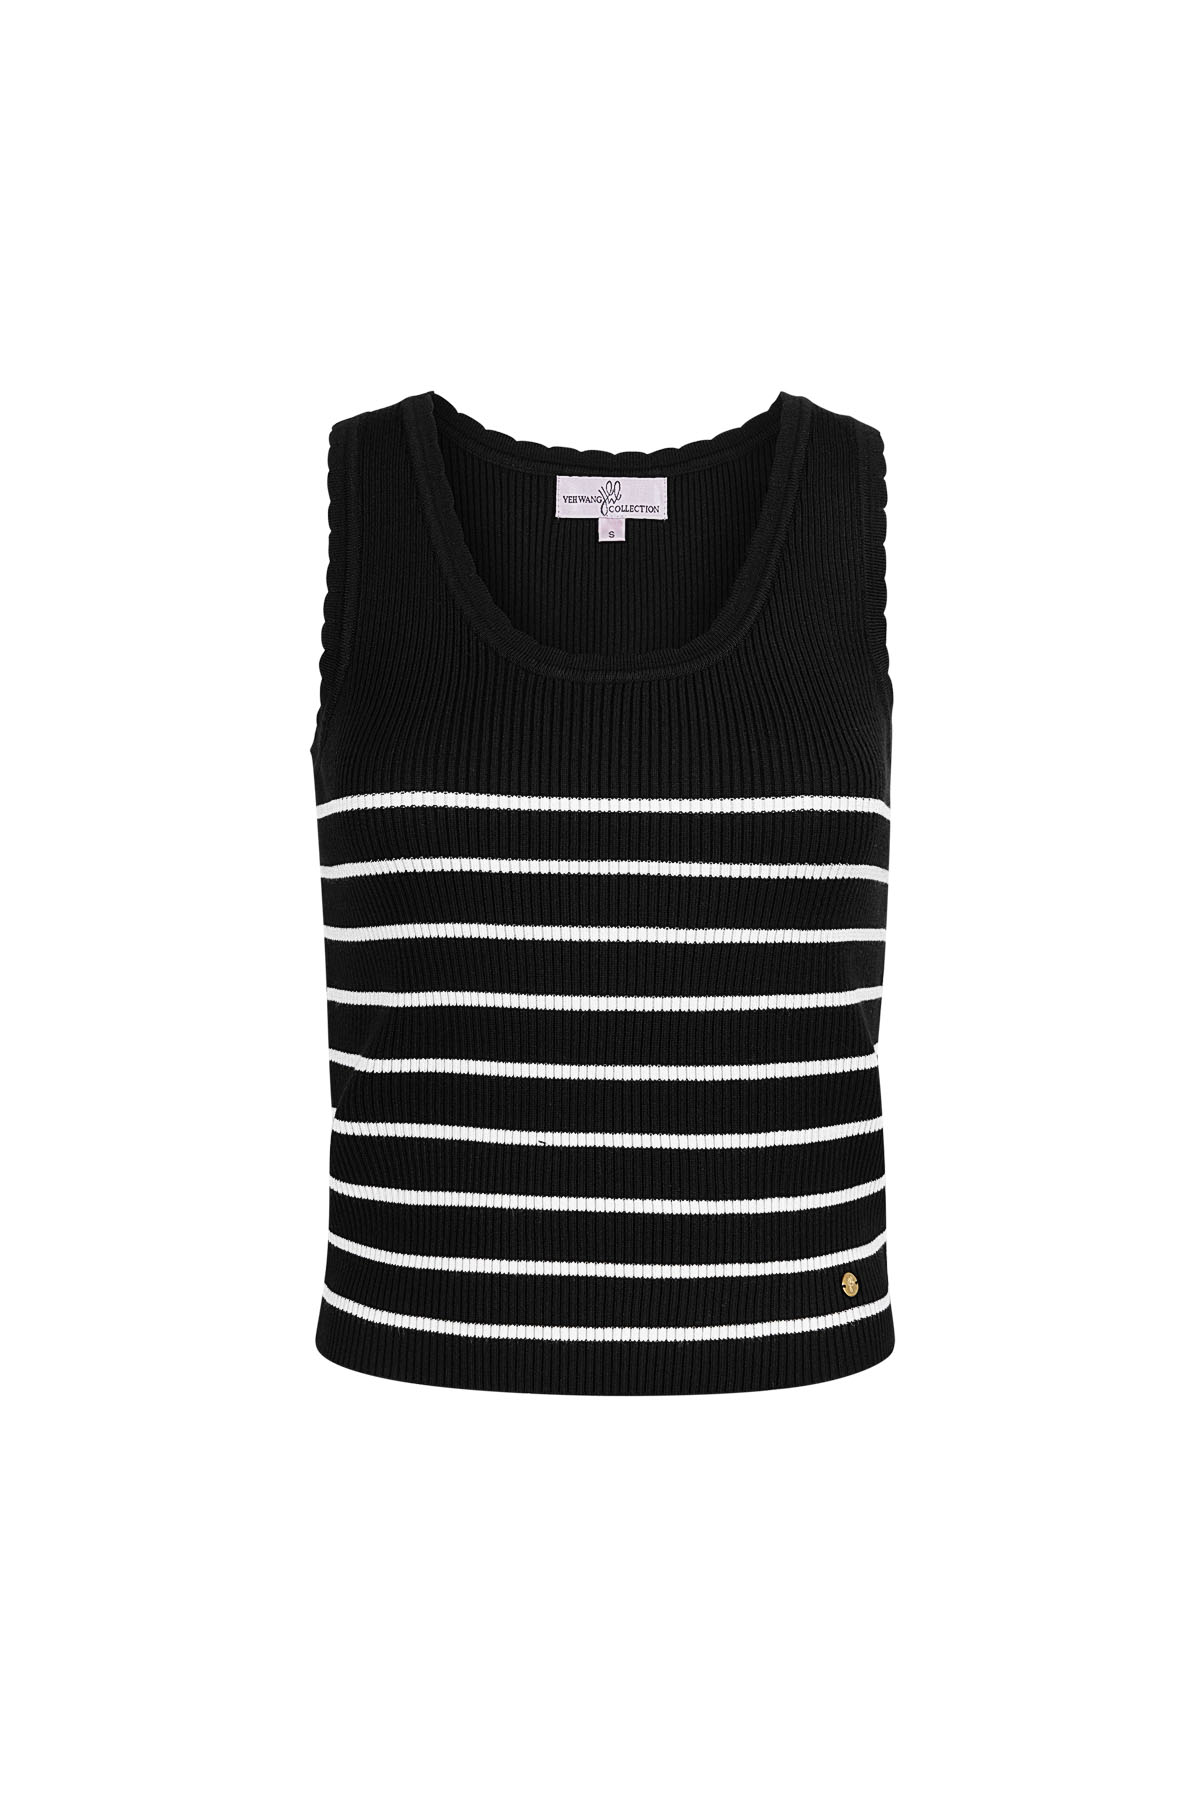 Striped, sleeveless top with classic edge small - black h5 